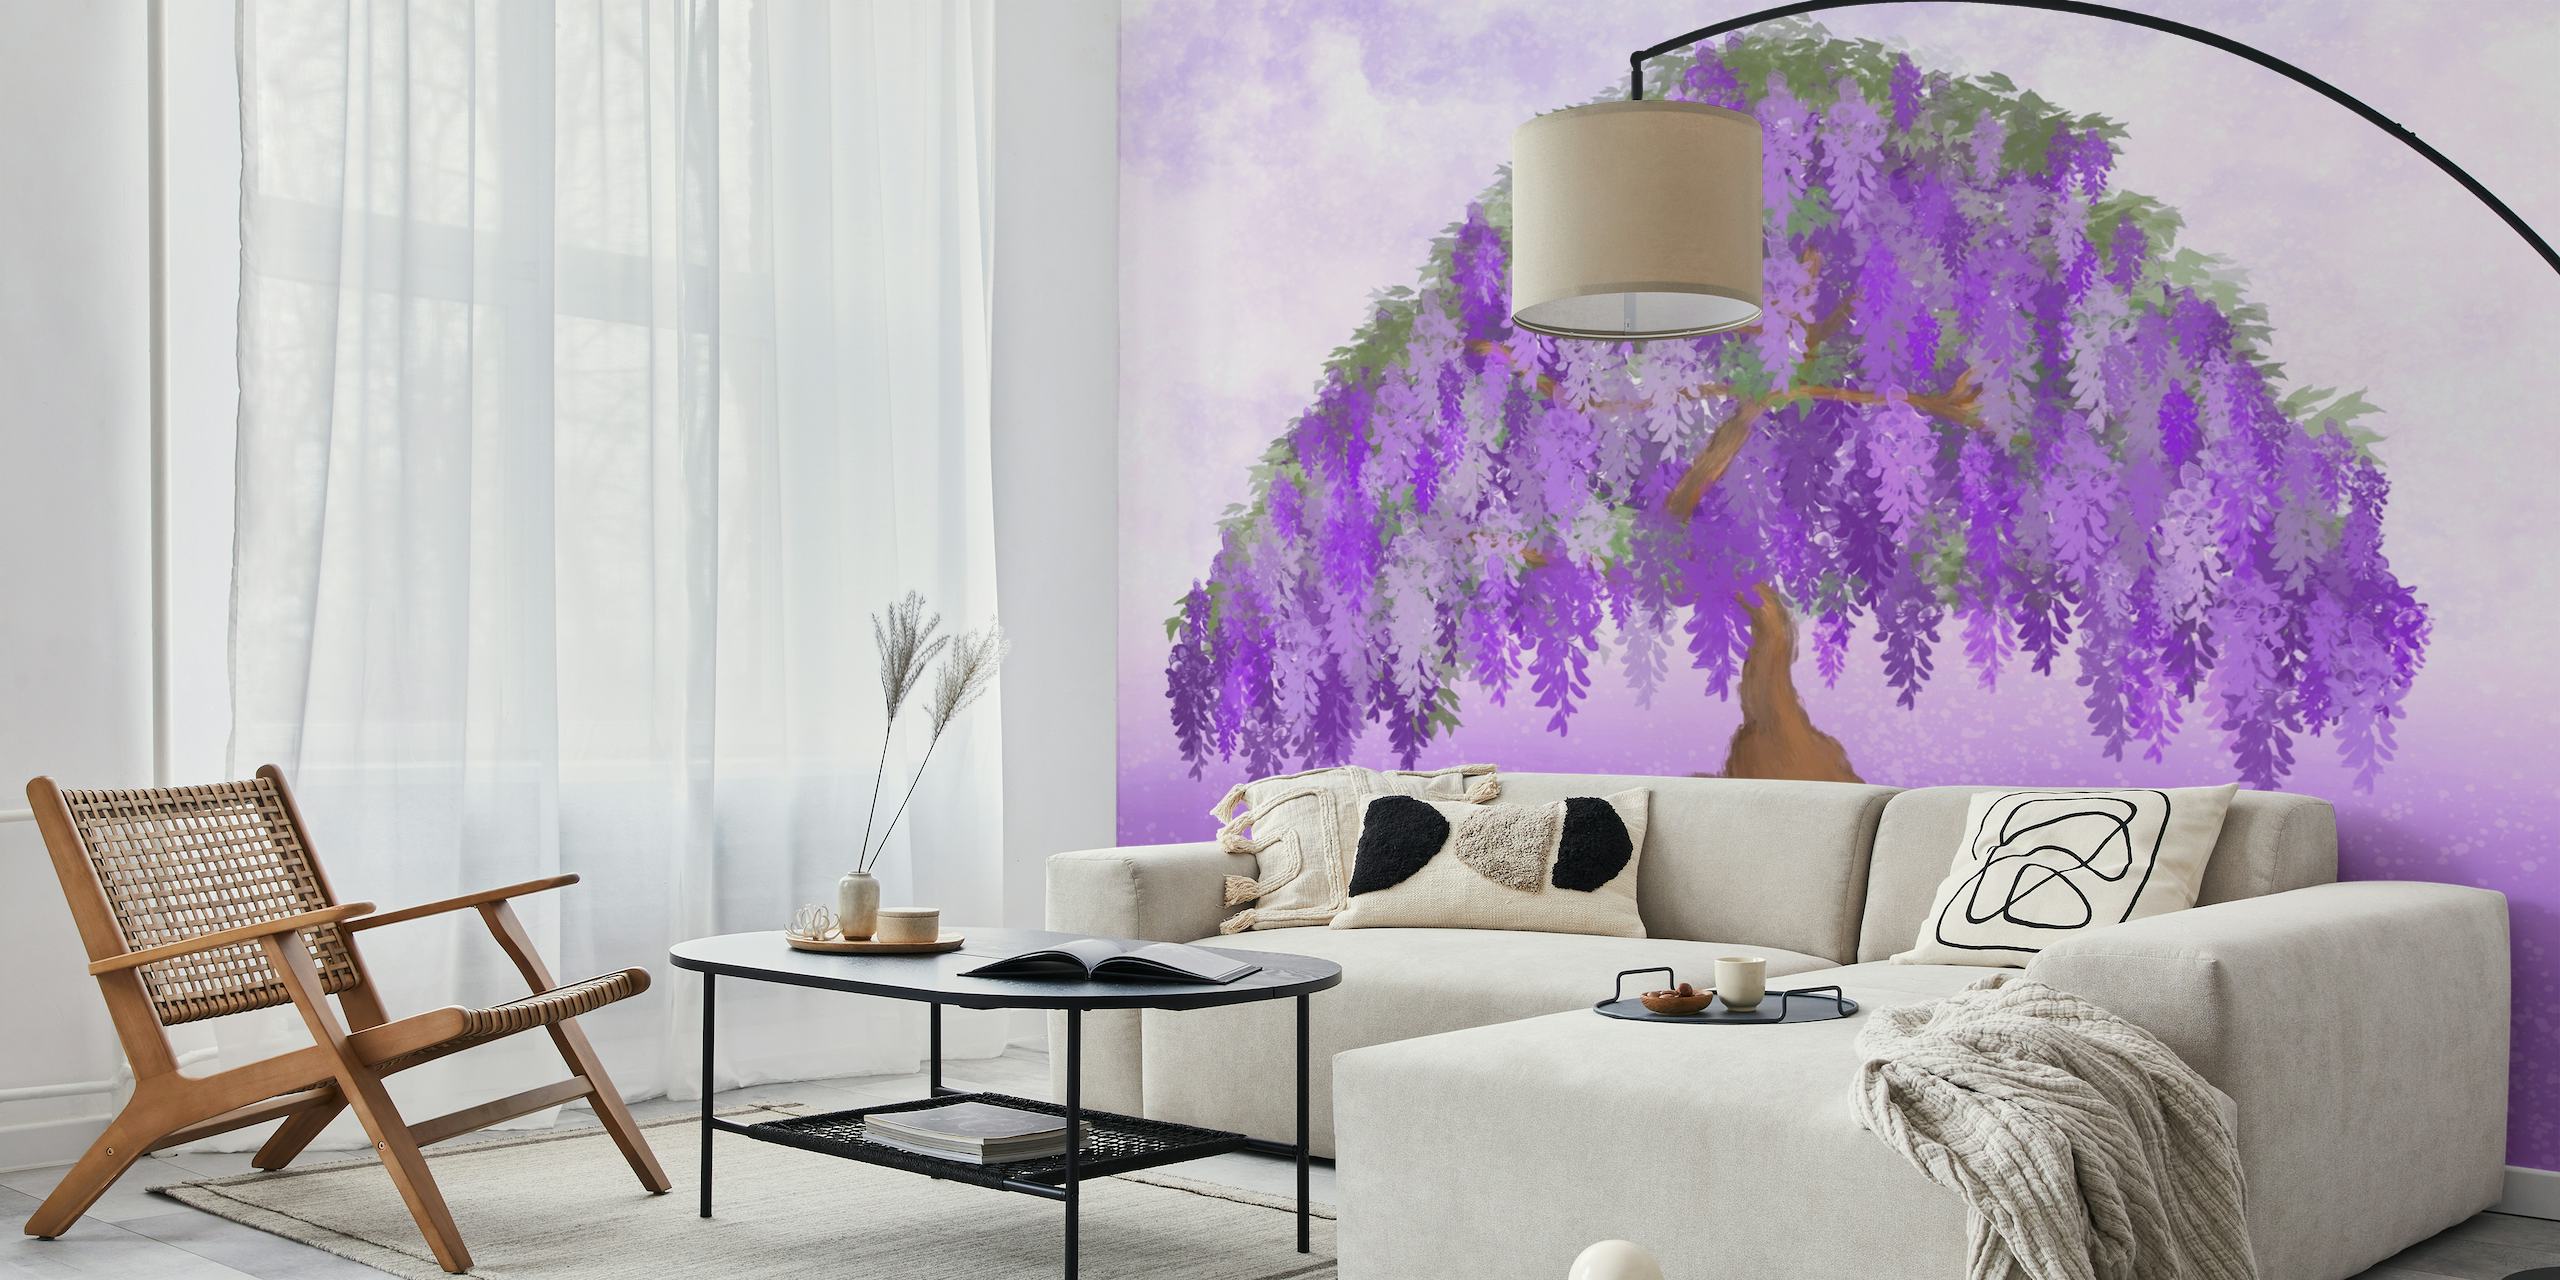 Wisteria Bonsai Tree wall mural depicting a bonsai in full bloom with a soft purple background